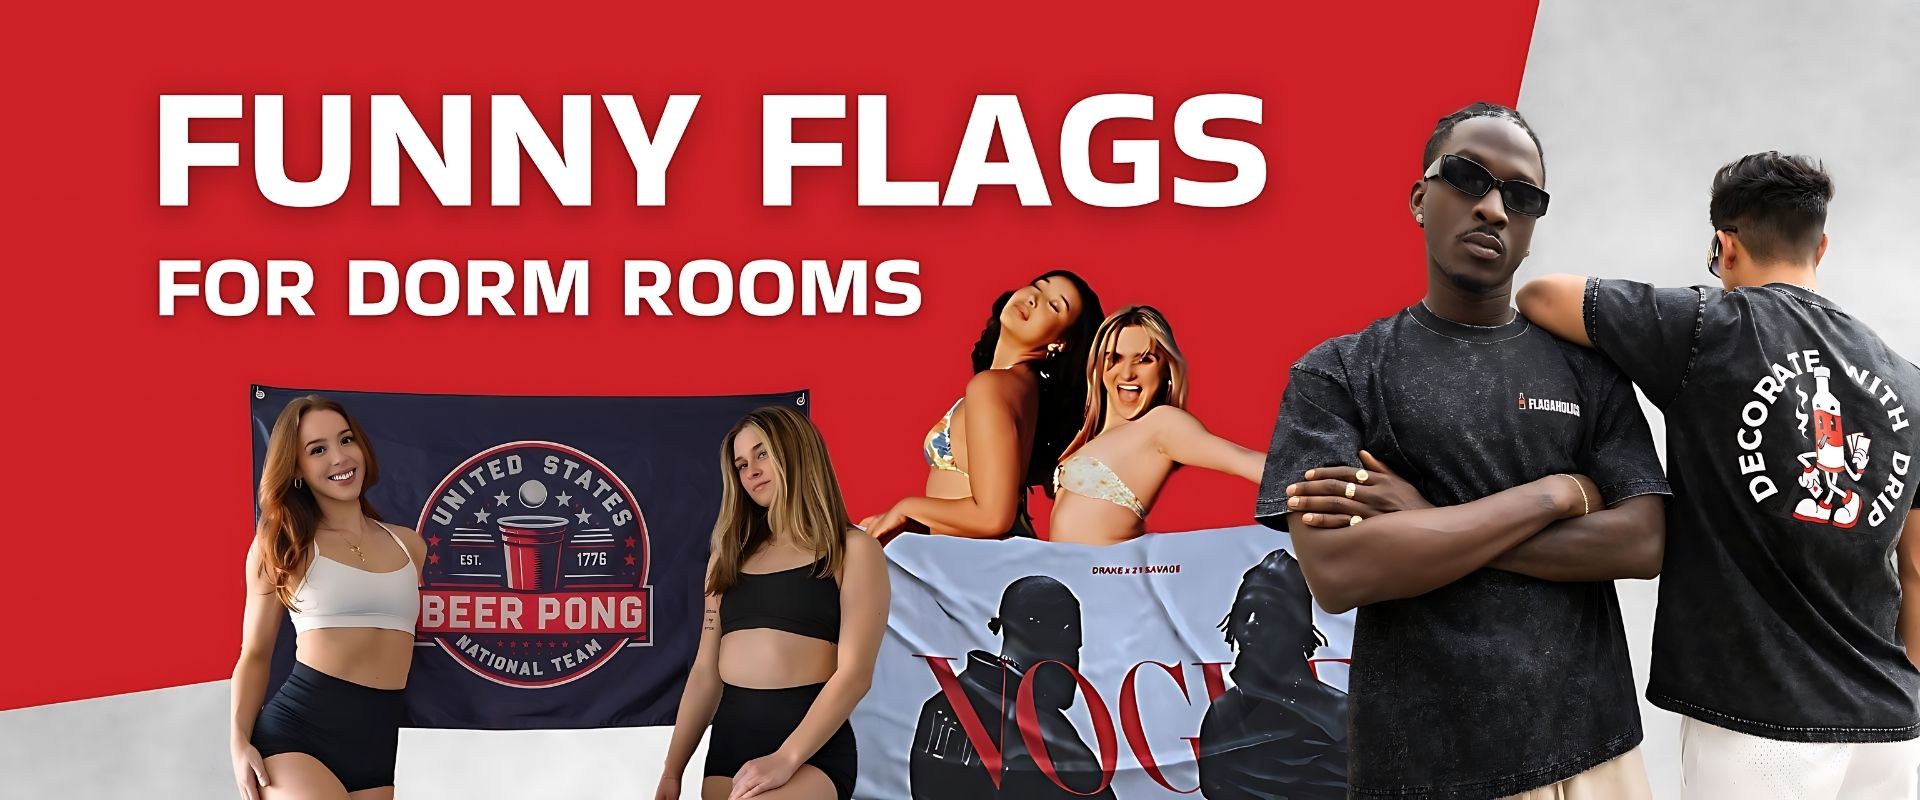 Group of happy college students showcasing Funny Flags for dorm rooms from Flagaholics, with a 'United States of Beer Pong' flag and a 'Vogue'-inspired flag, promoting humor and personality in college living spaces.